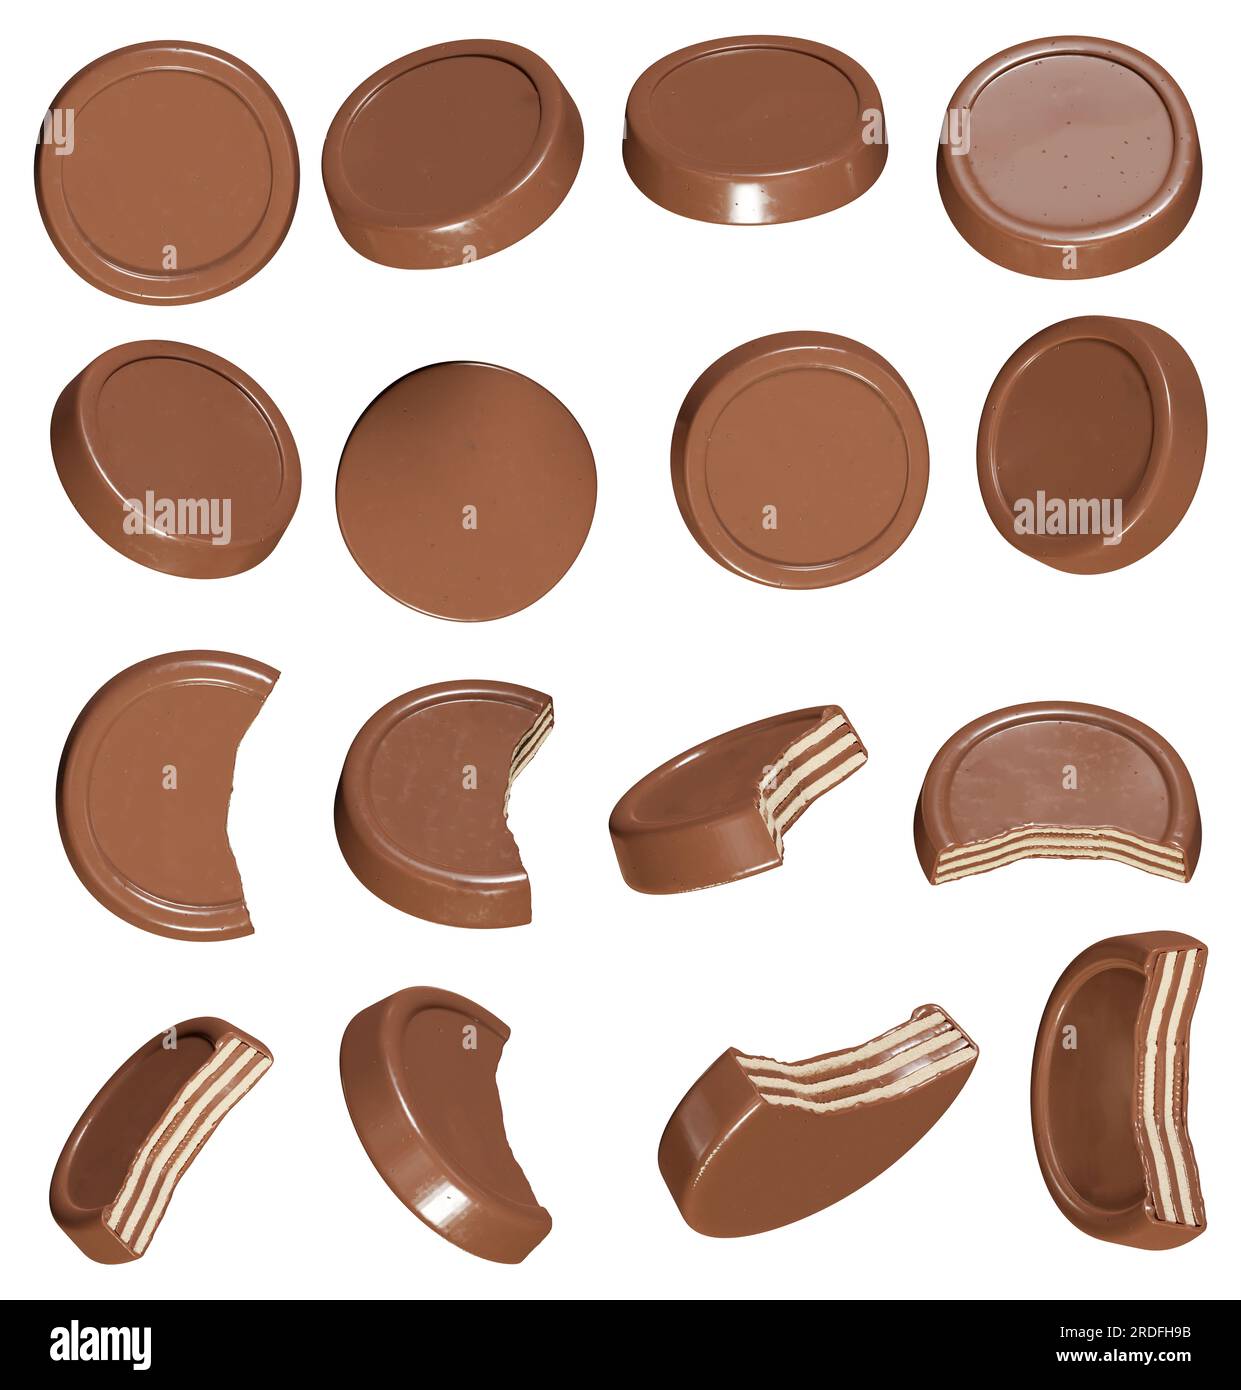 Round chocolate wafer from diffrent angles isolated on white background - 3D render Stock Photo